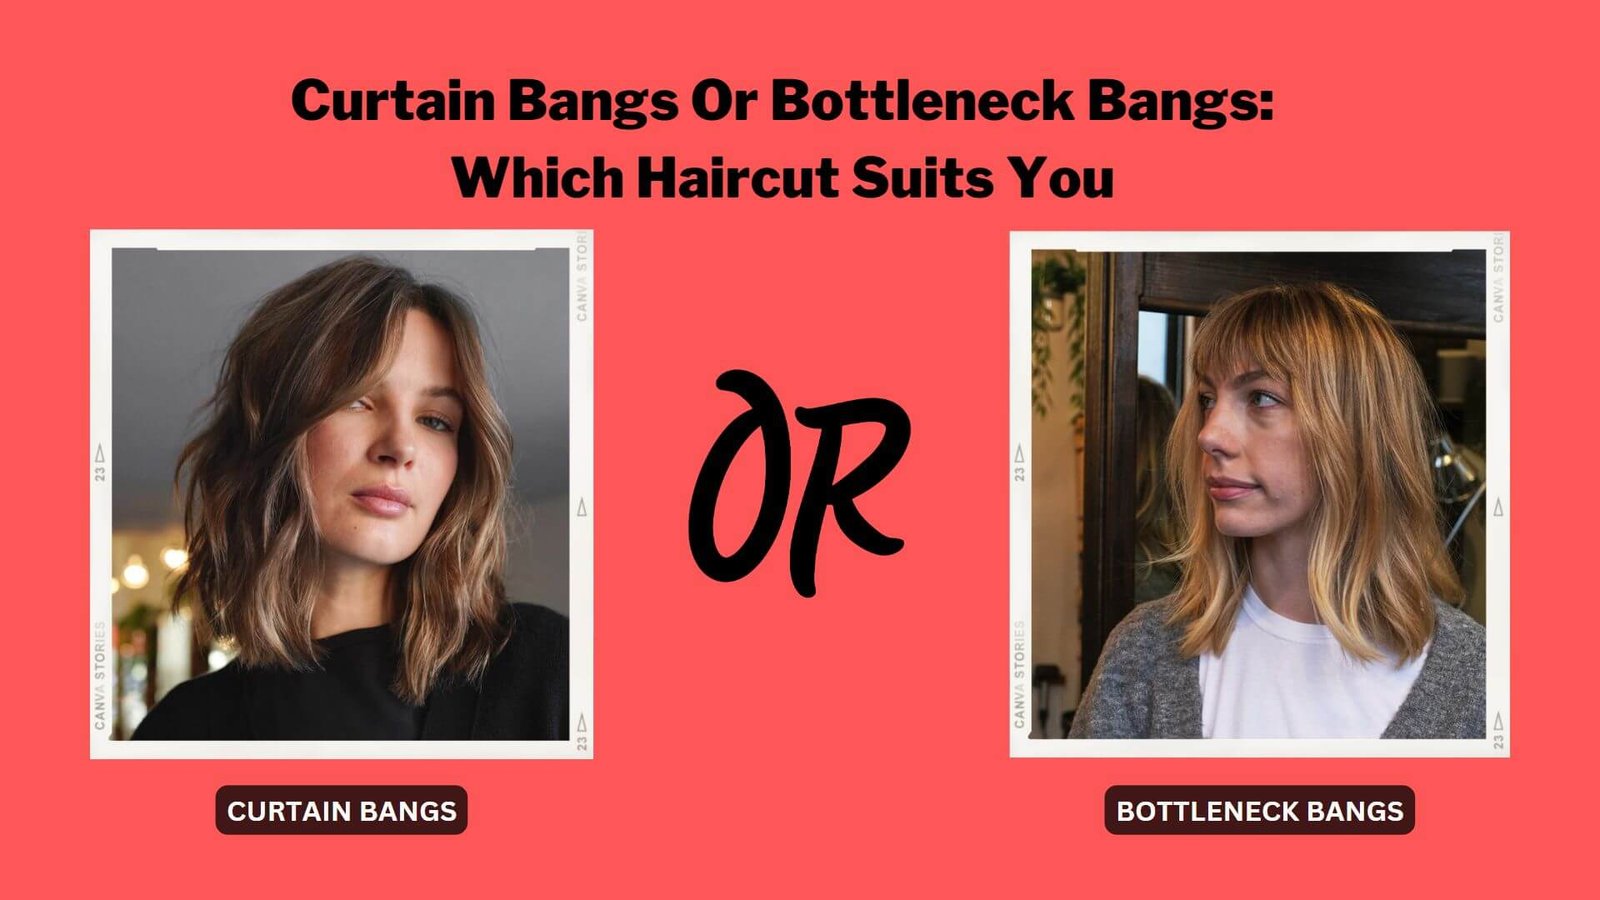 Curtain Bangs Or Bottleneck Bangs Which Haircut Suits You